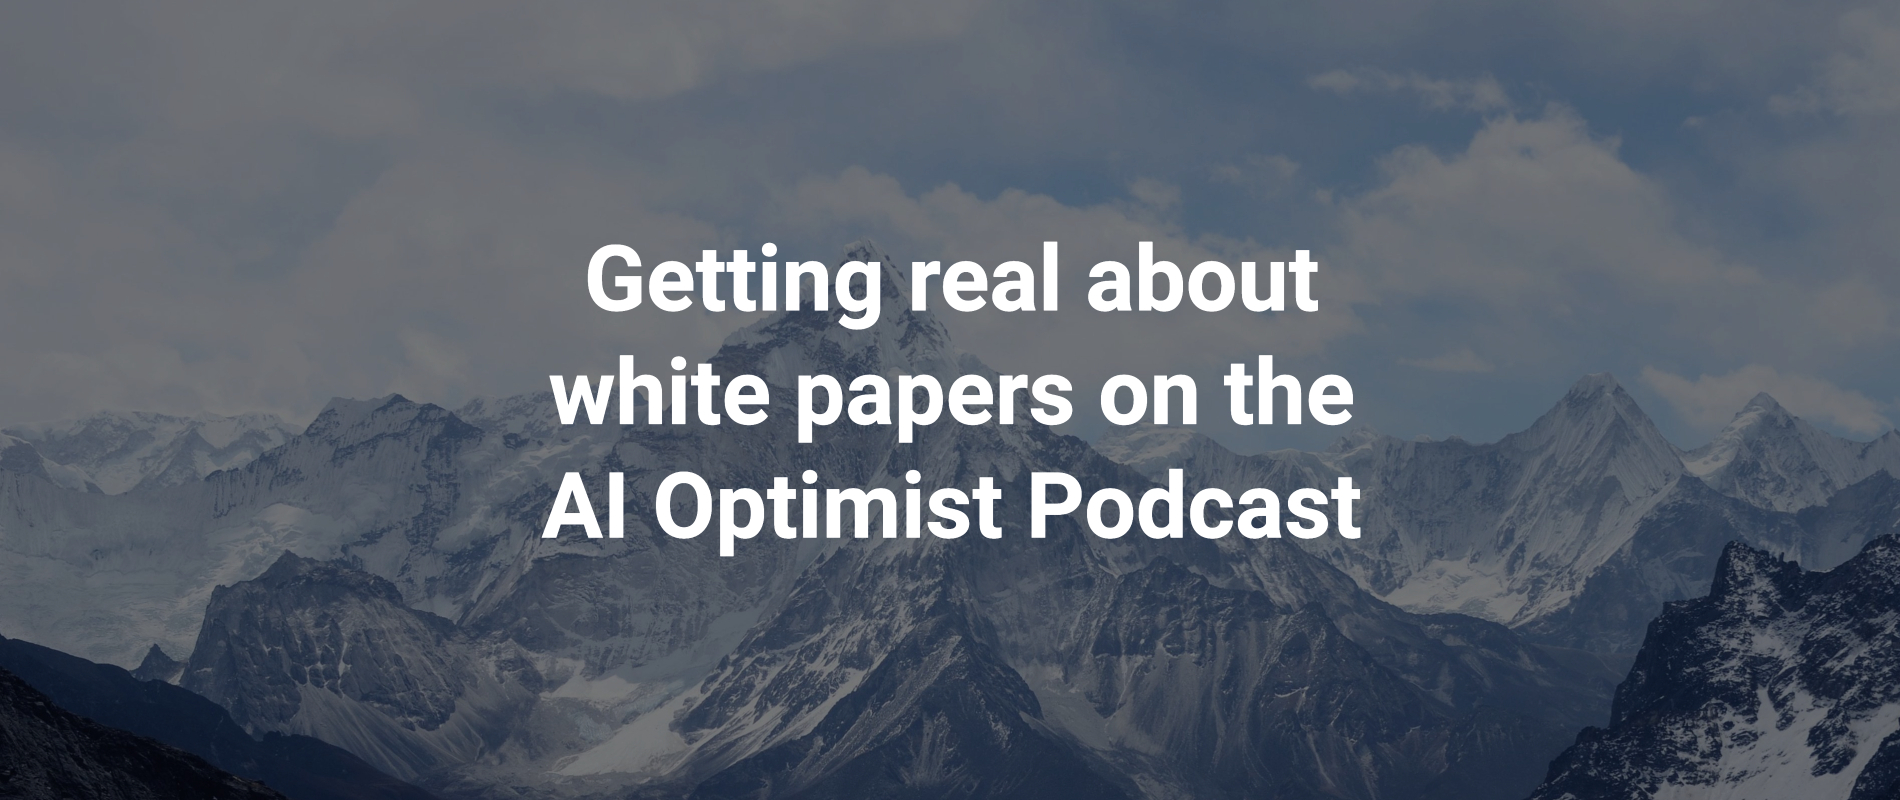 Getting real about white papers on the AI Optimist Podcast